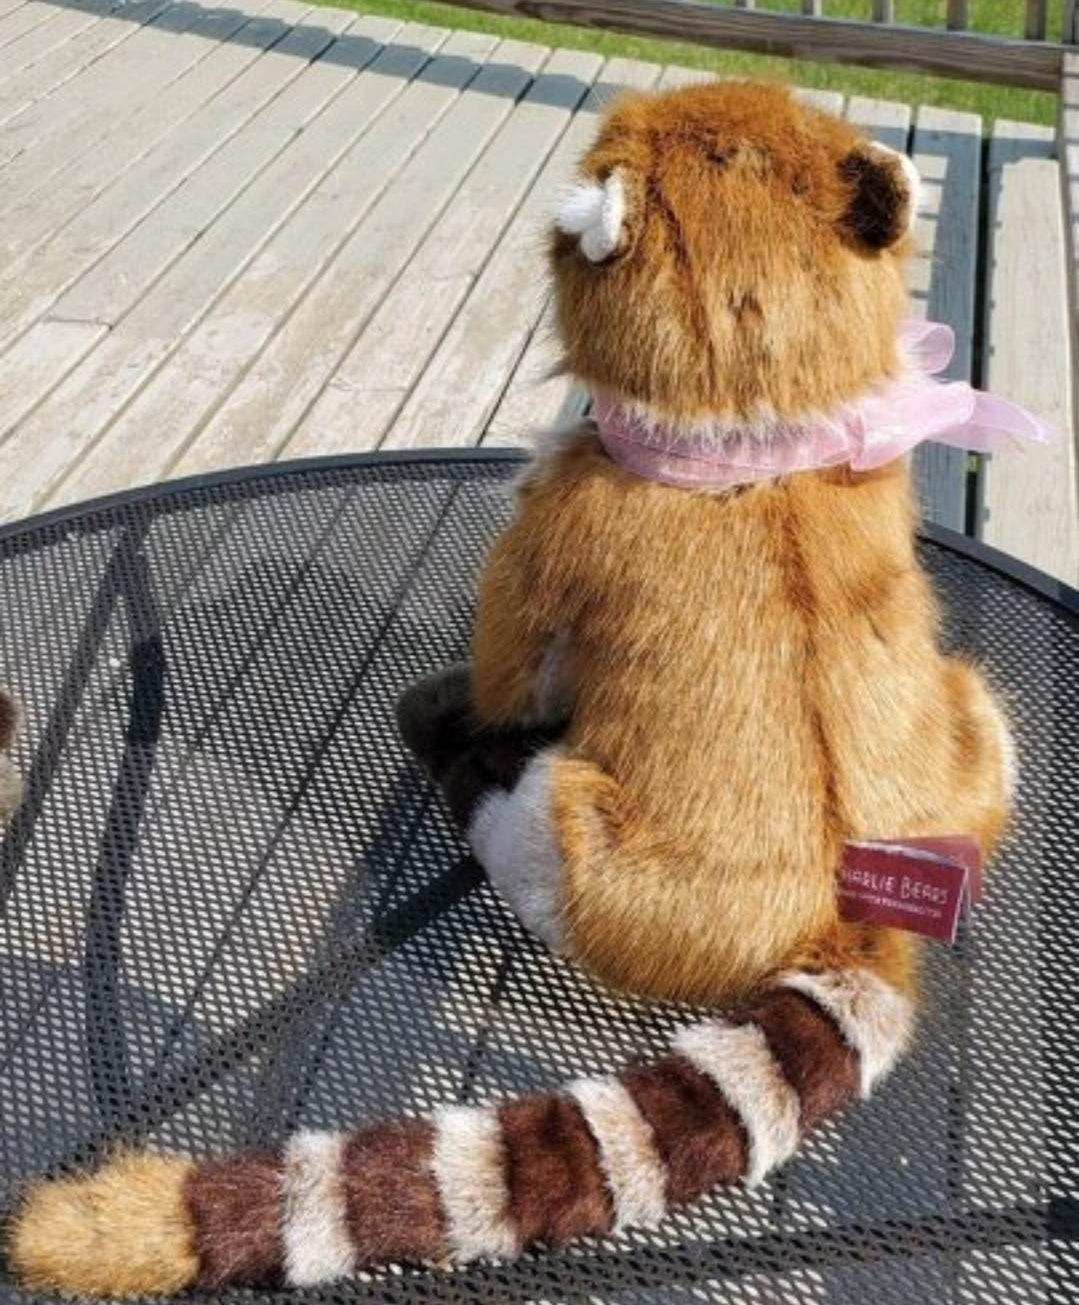 Perth – 14" Charlie Bears Bearhouse Collection  - Non-jointed, Safe for 18 months and up!